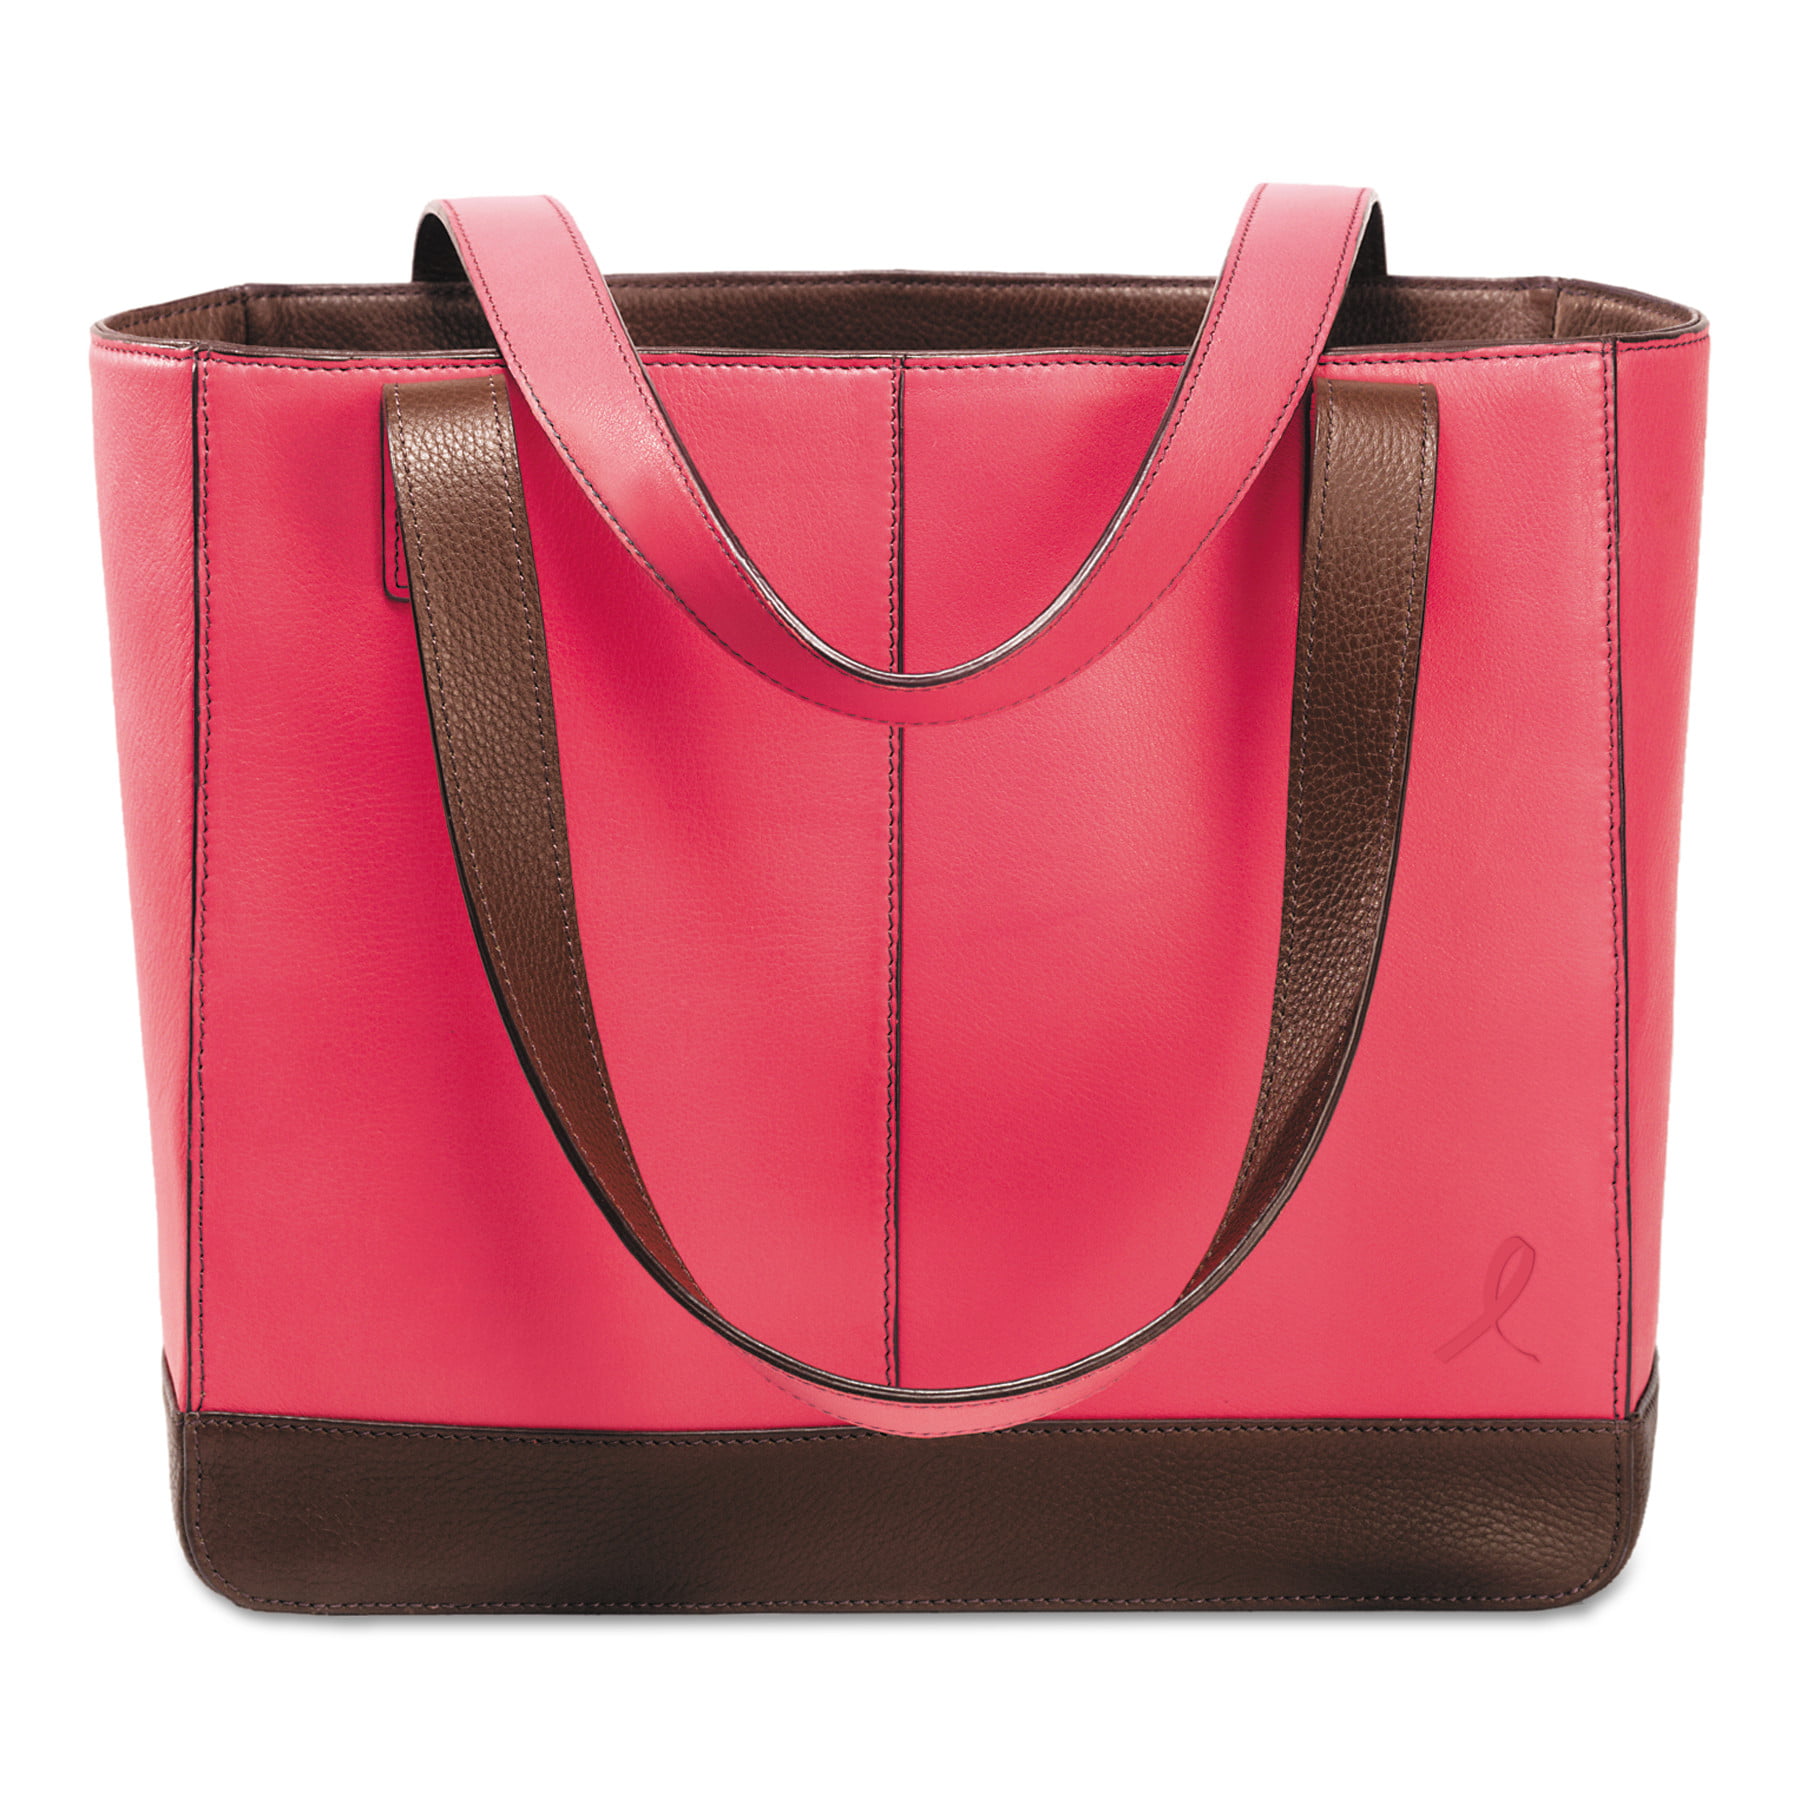 Day-Timer Pink Ribbon Leather Tote, 11 1/2 x 4 x 10, Pink/Chocolate 